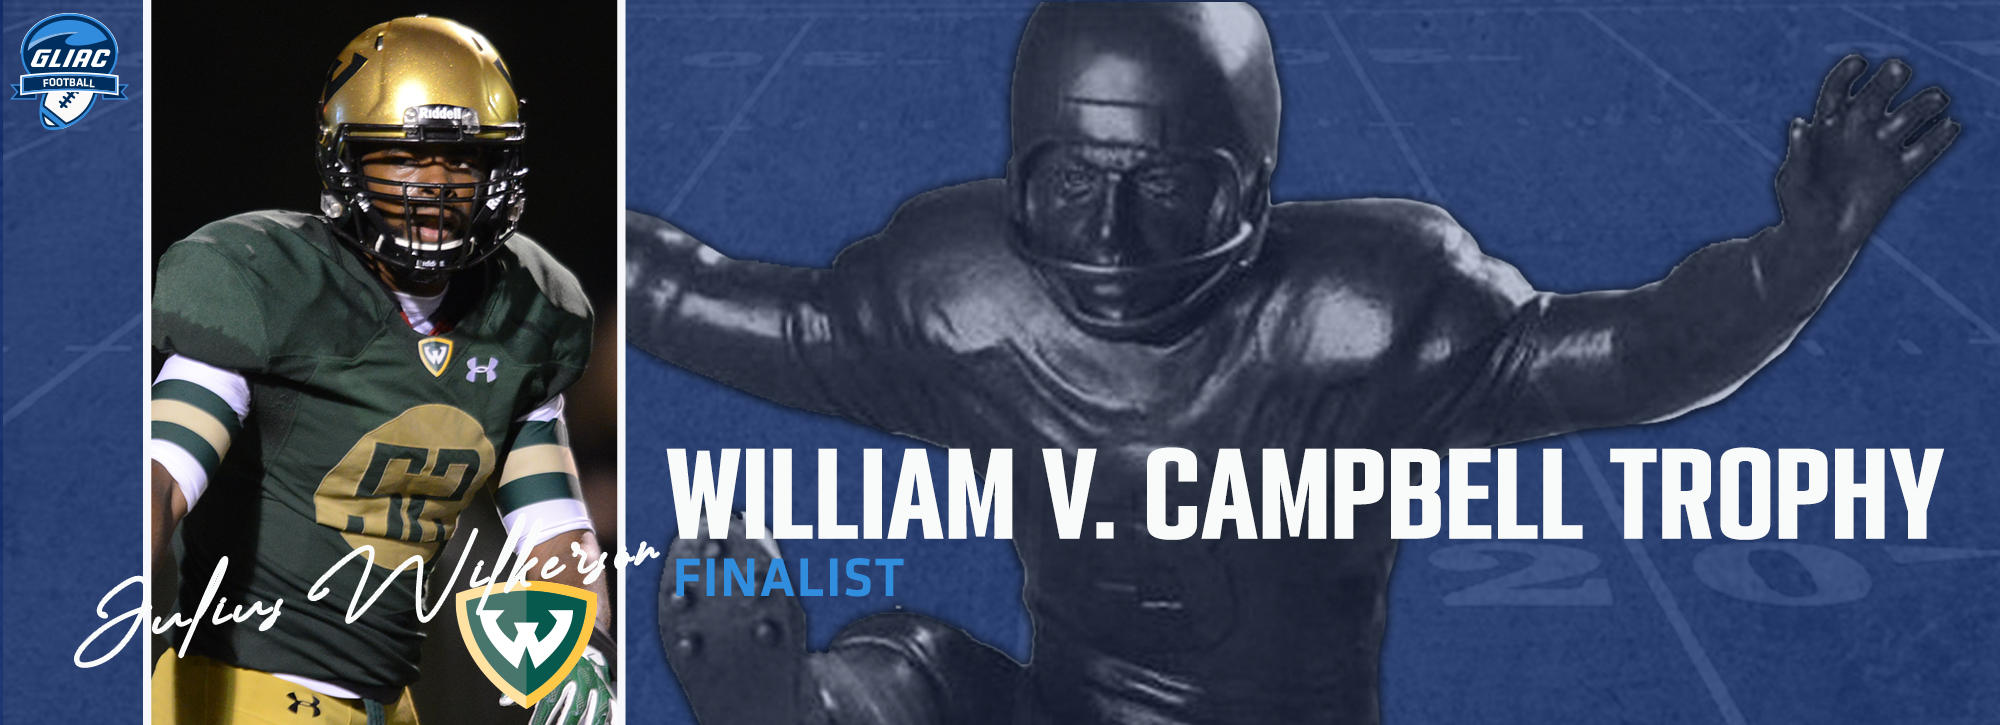 Wayne State's Wilkerson named a finalist for the William V. Campbell Trophy